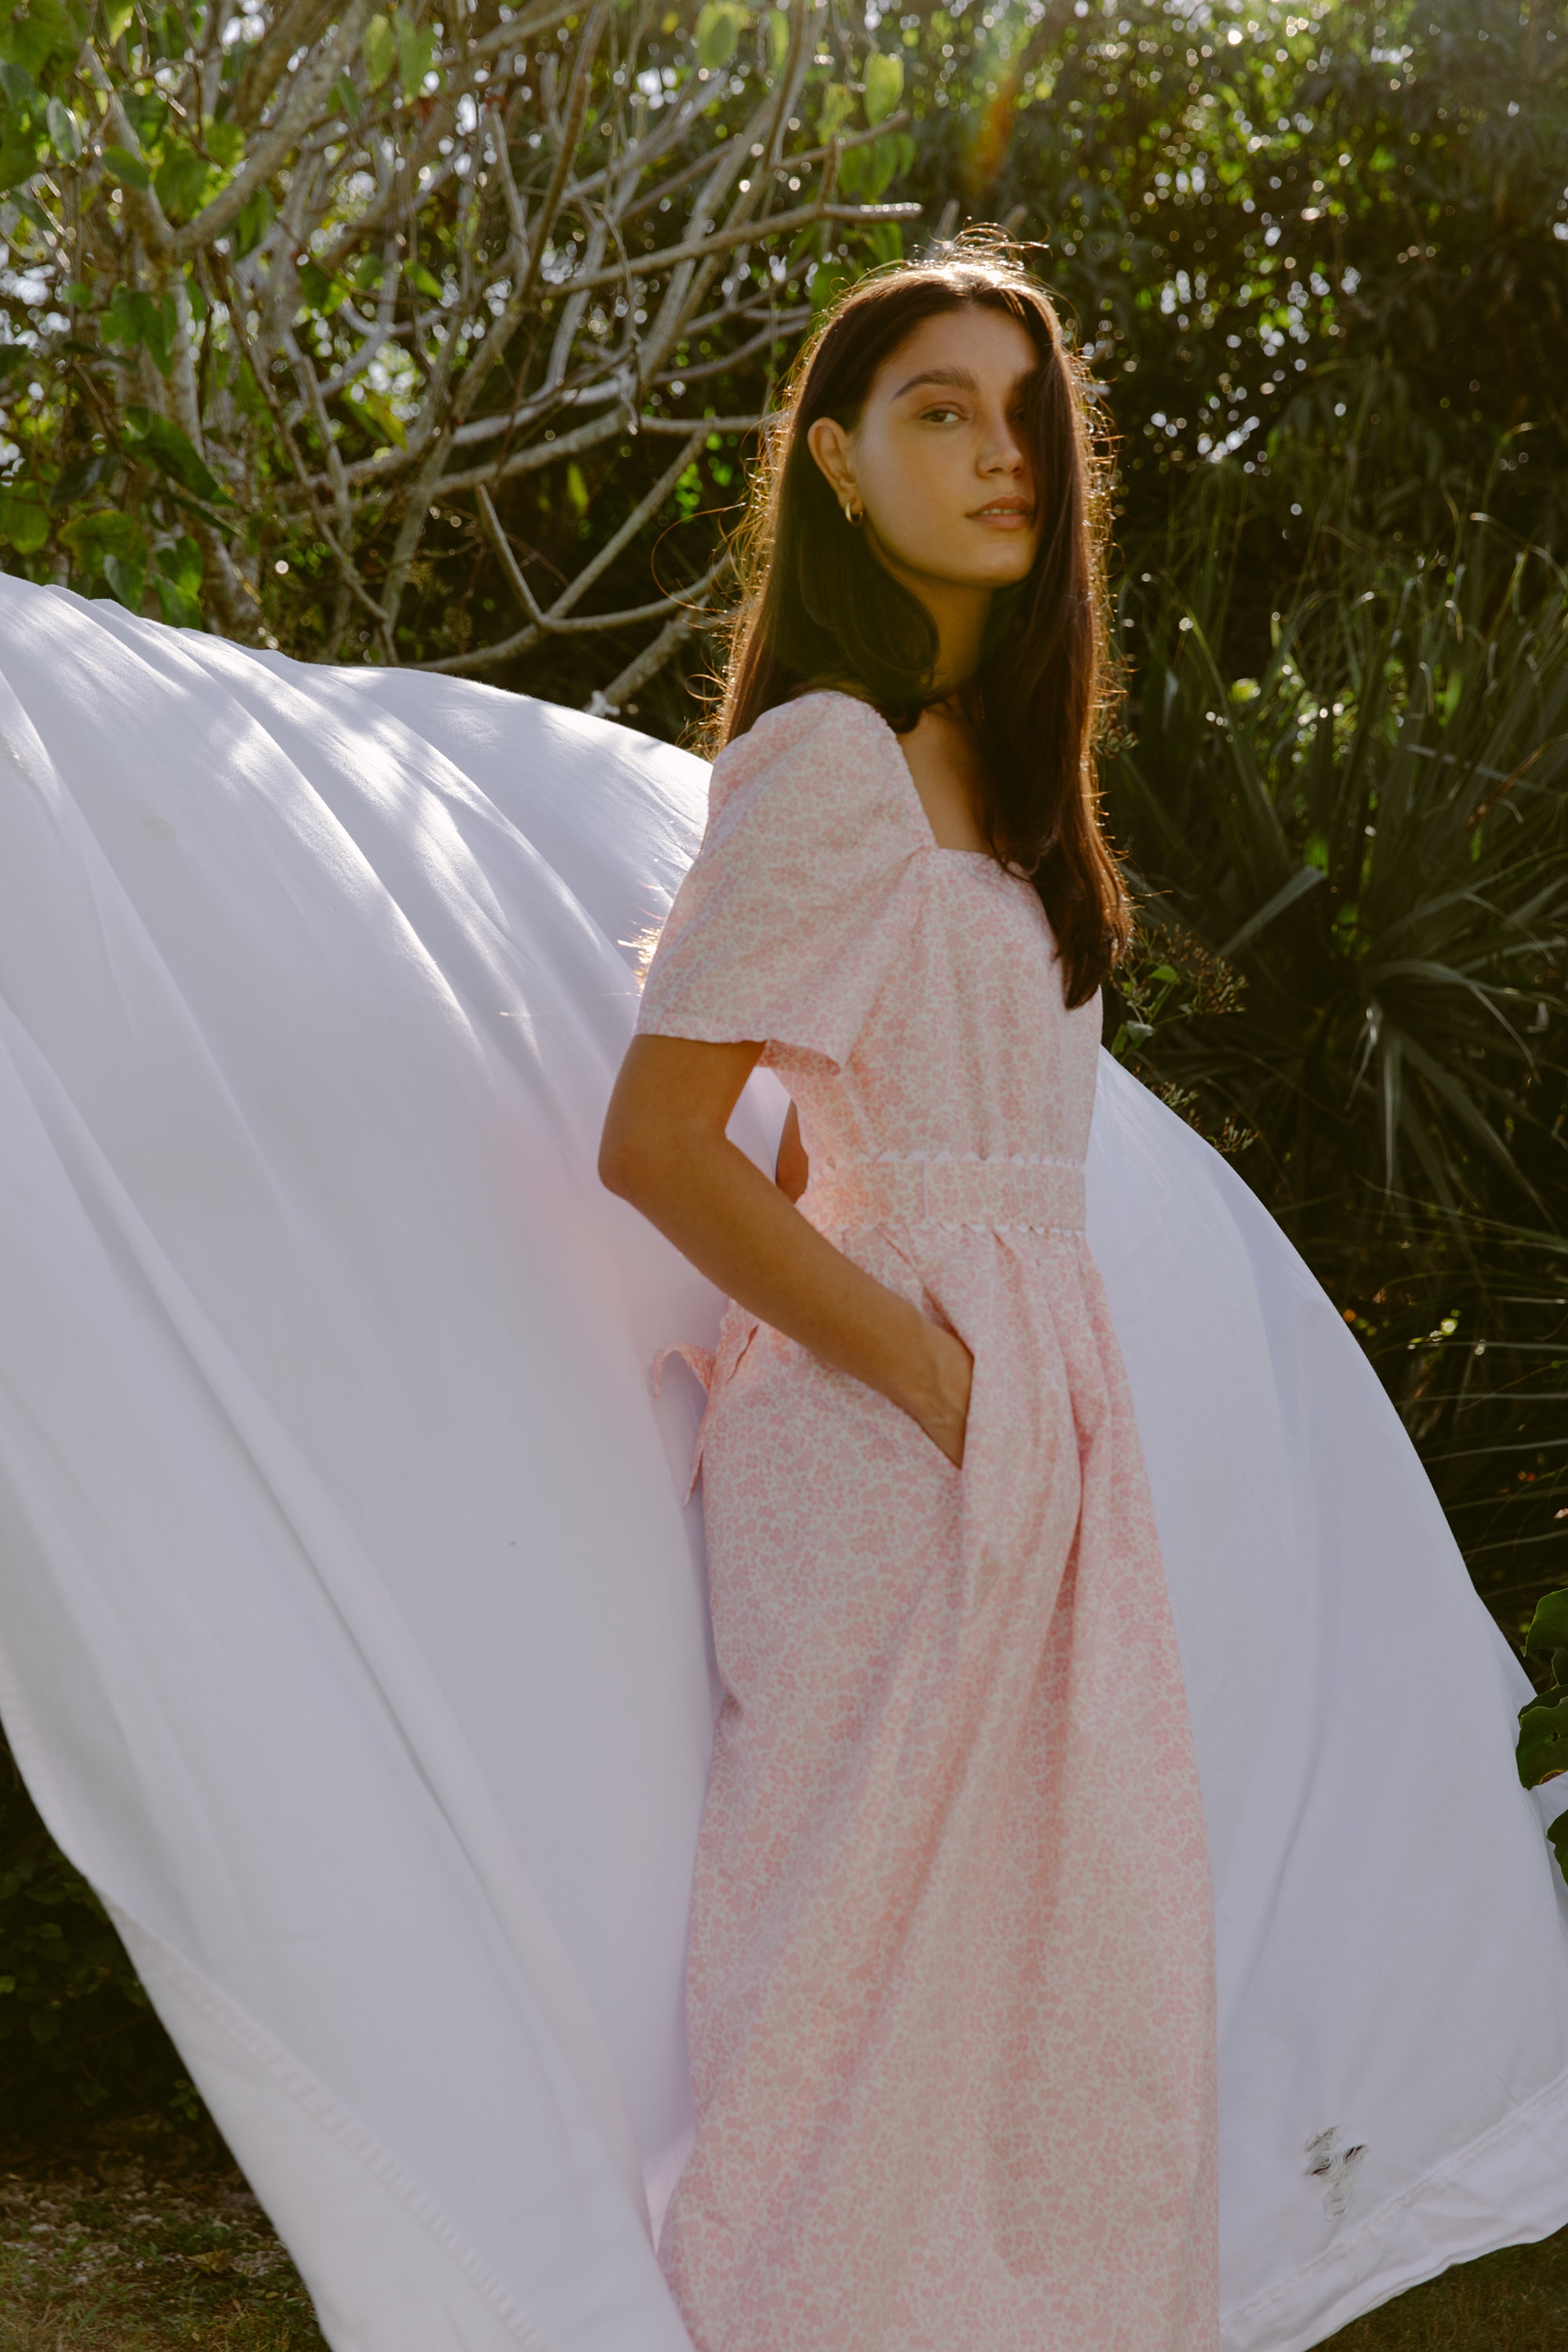 Woman in a pink cotton dress standing in front of a clothing line with a sheet draped over.